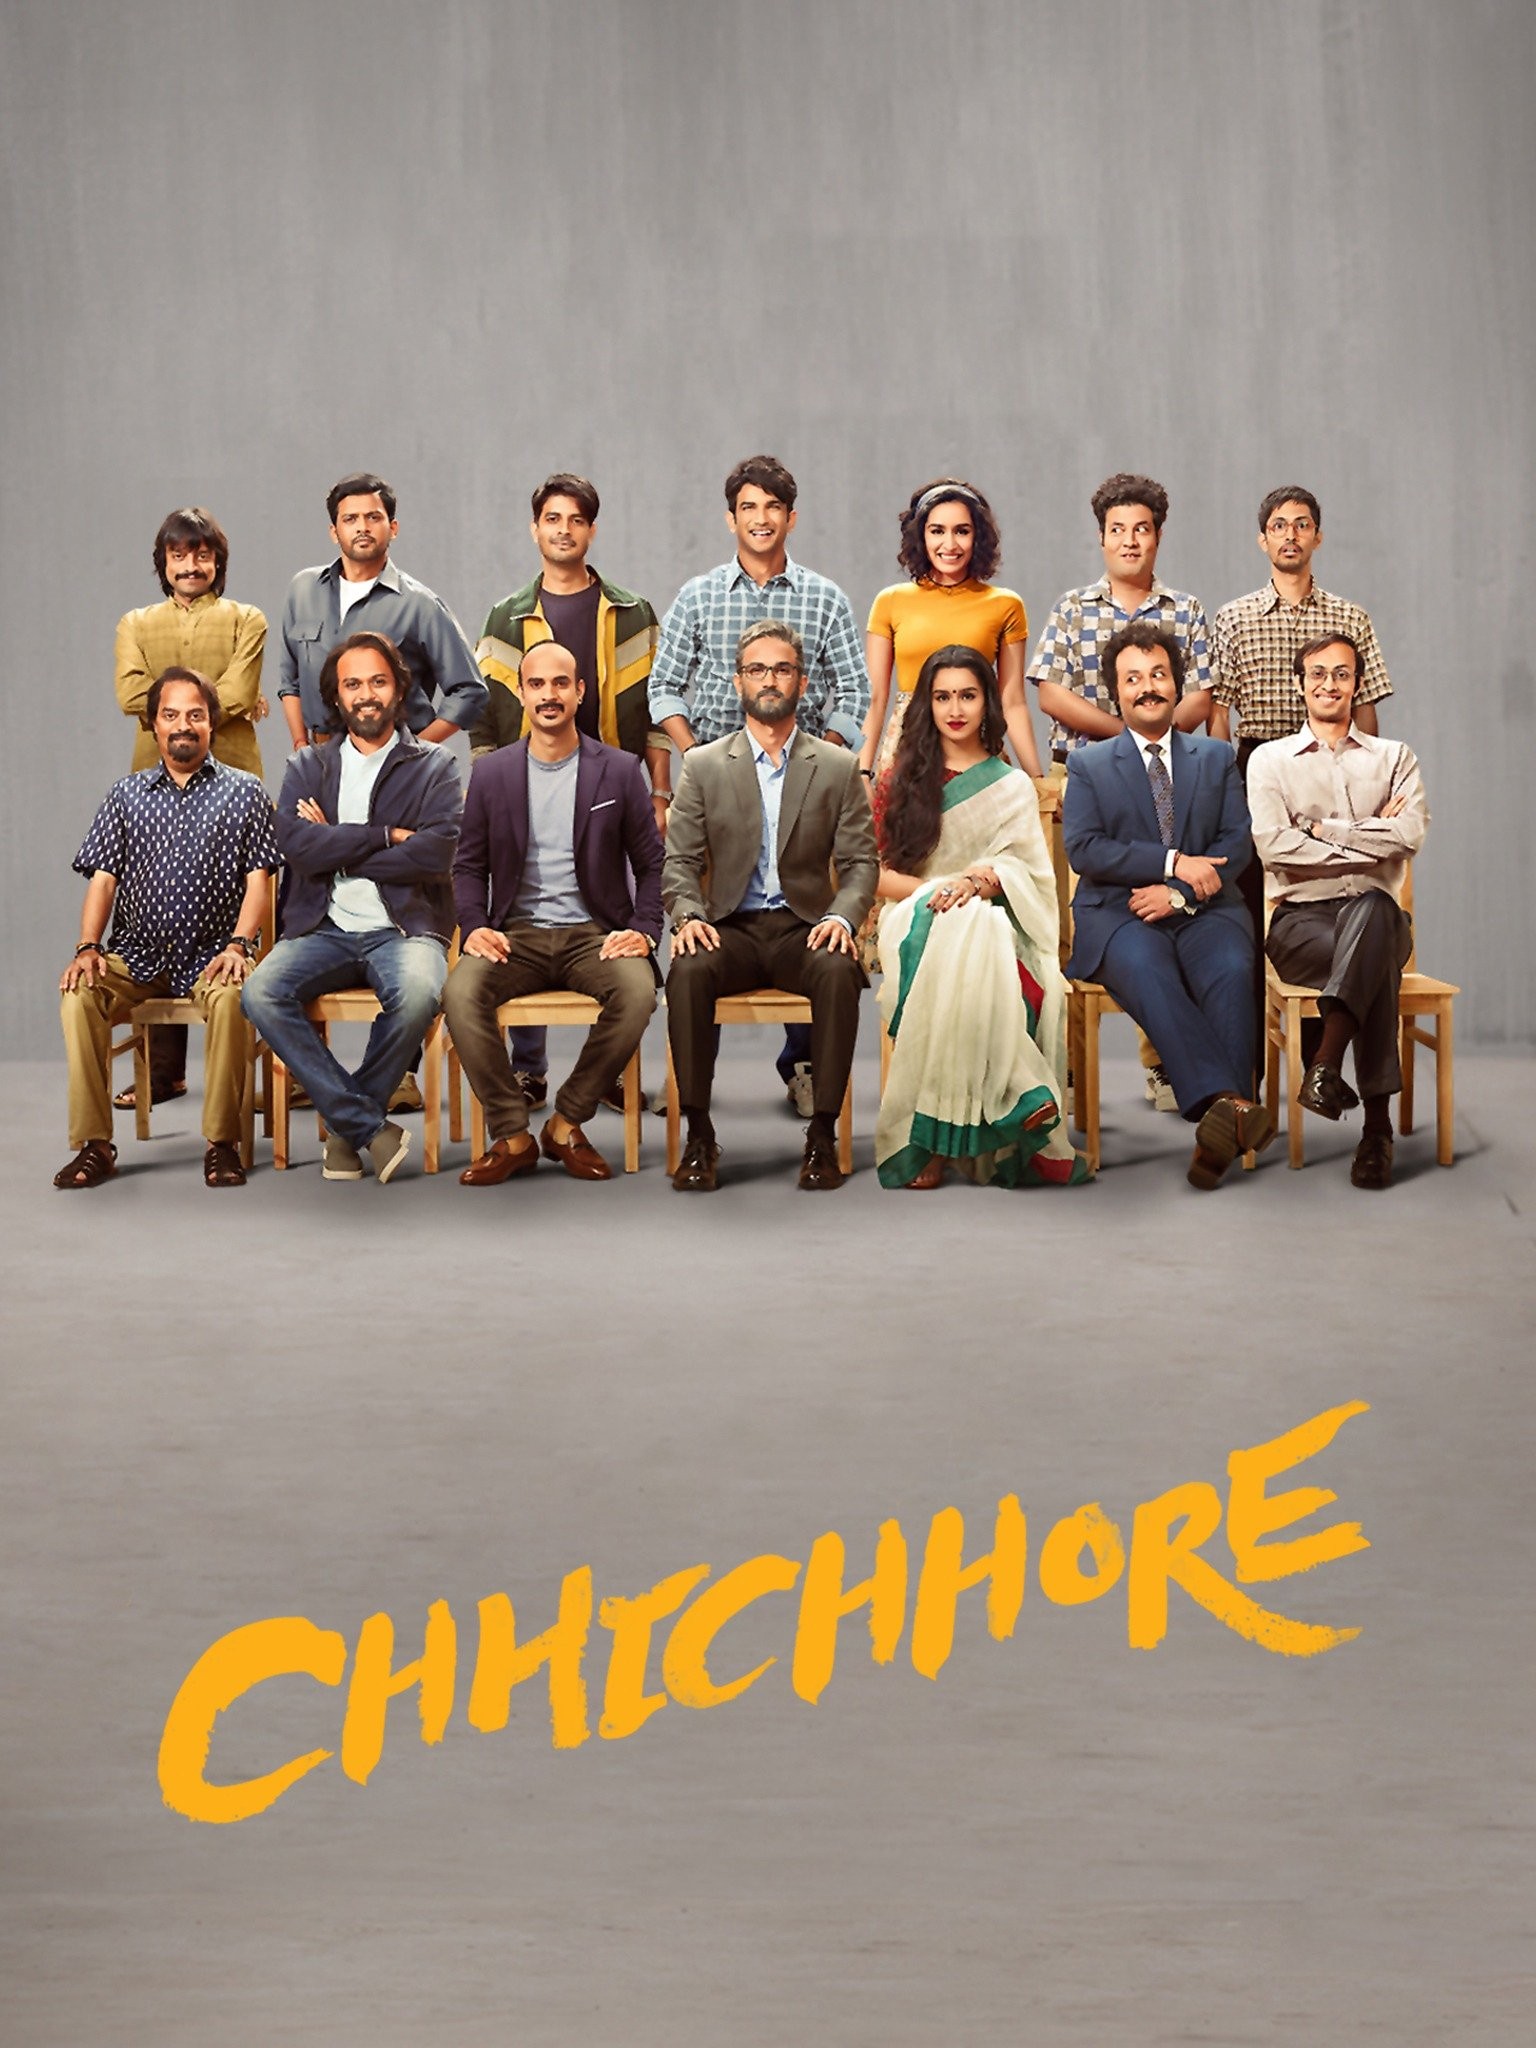 Chhichhore: Falls short, but with a heart